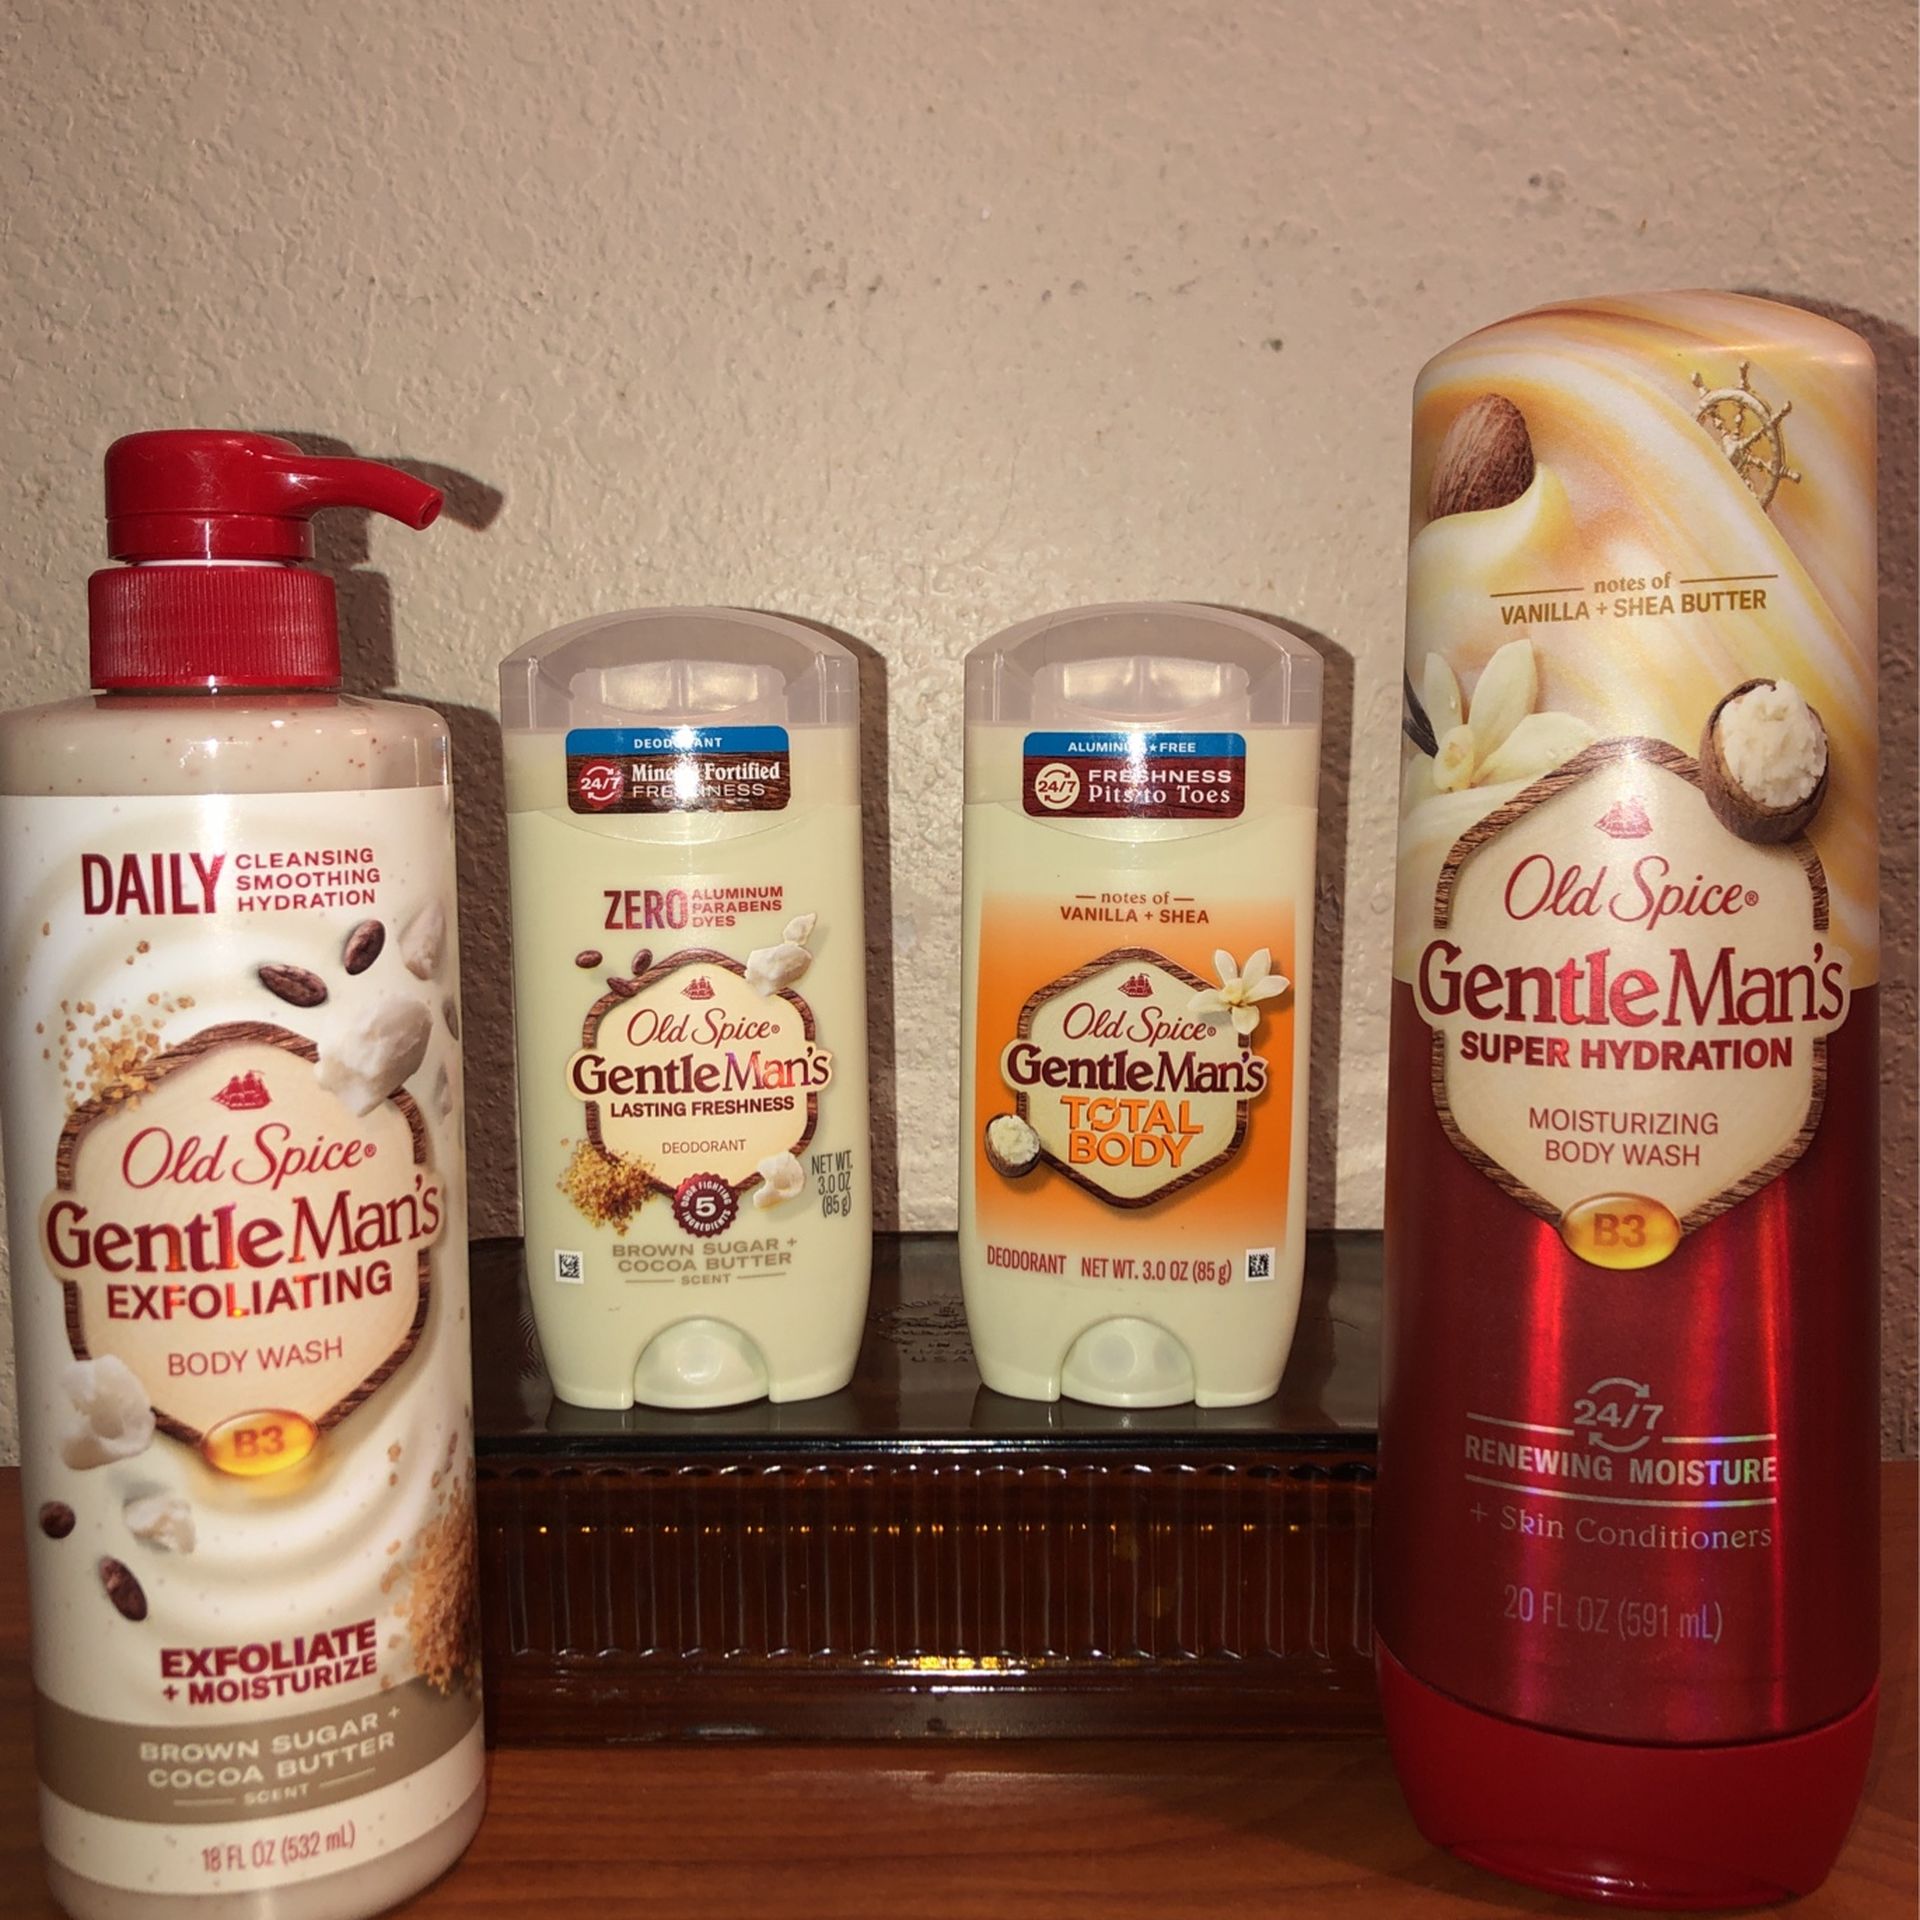 All Brand NEW! 🚿    Old Spice Body Care Products - Gentlemen’s (((PENDING PICK UP TODAY)))